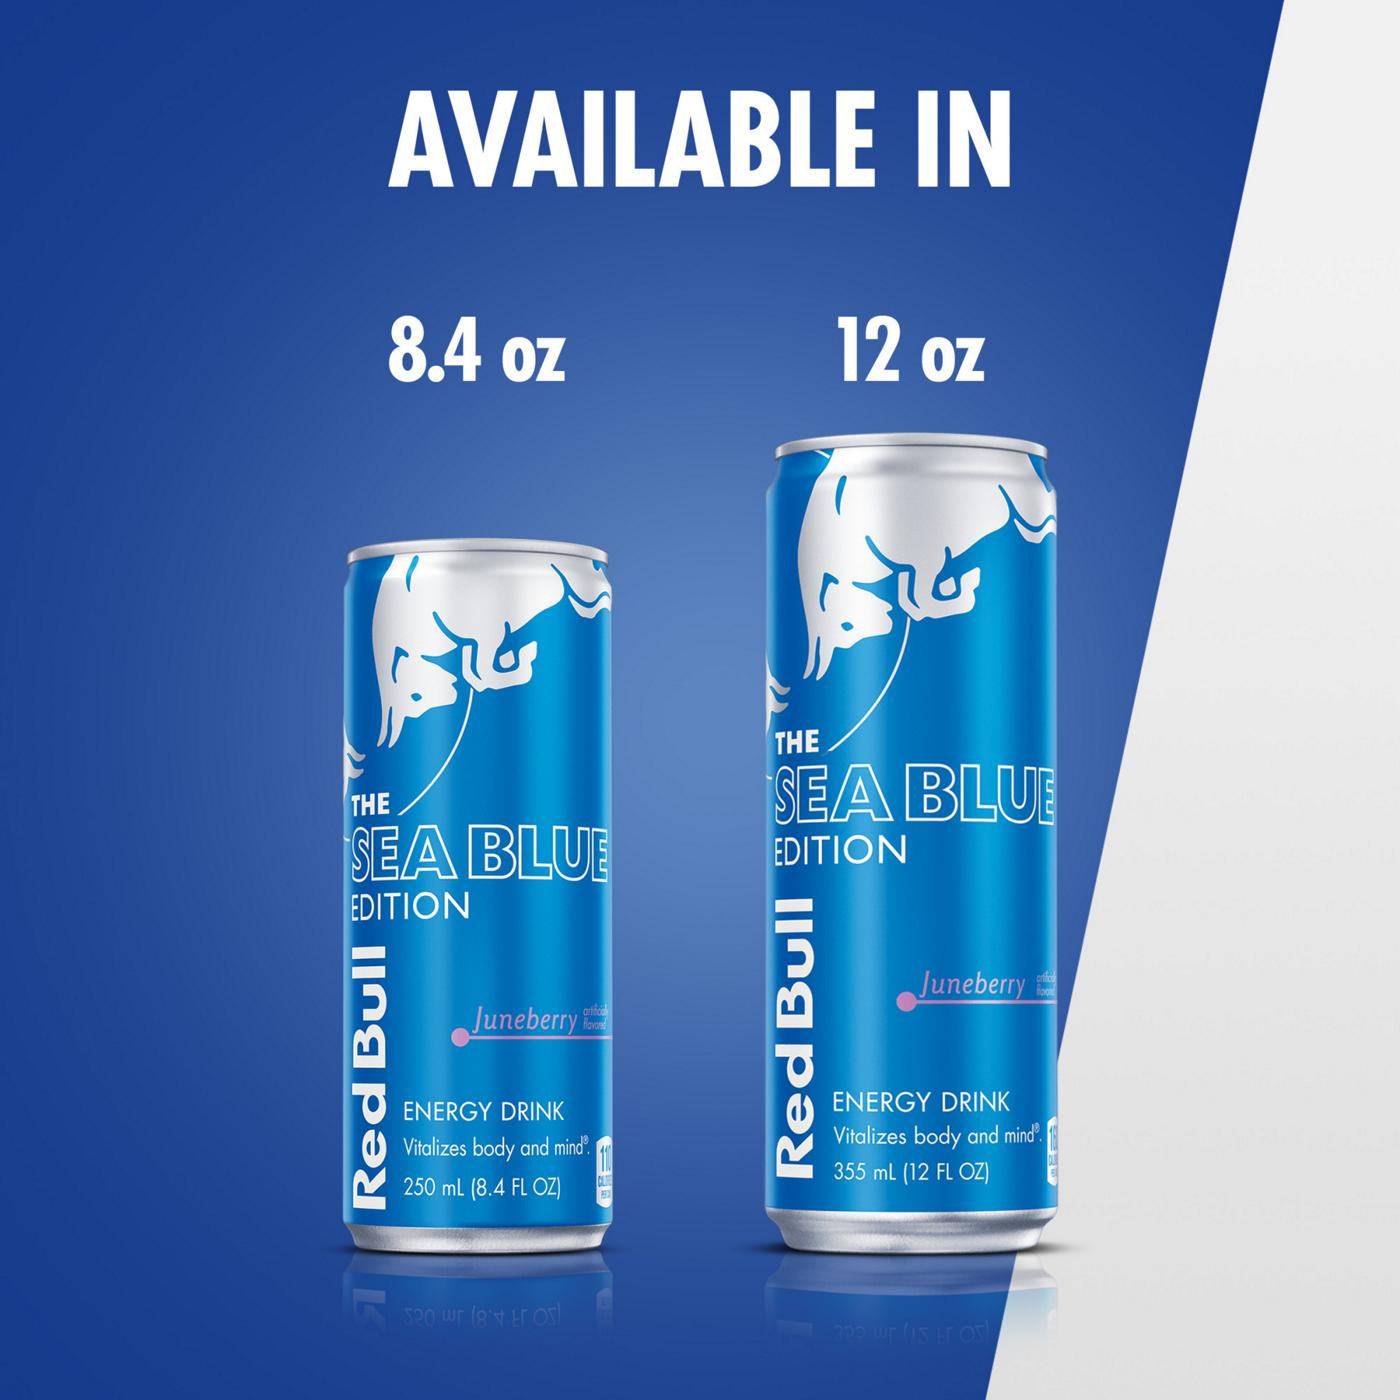 Red Bull Sea Blue Edition Juneberry Energy Drink; image 5 of 10